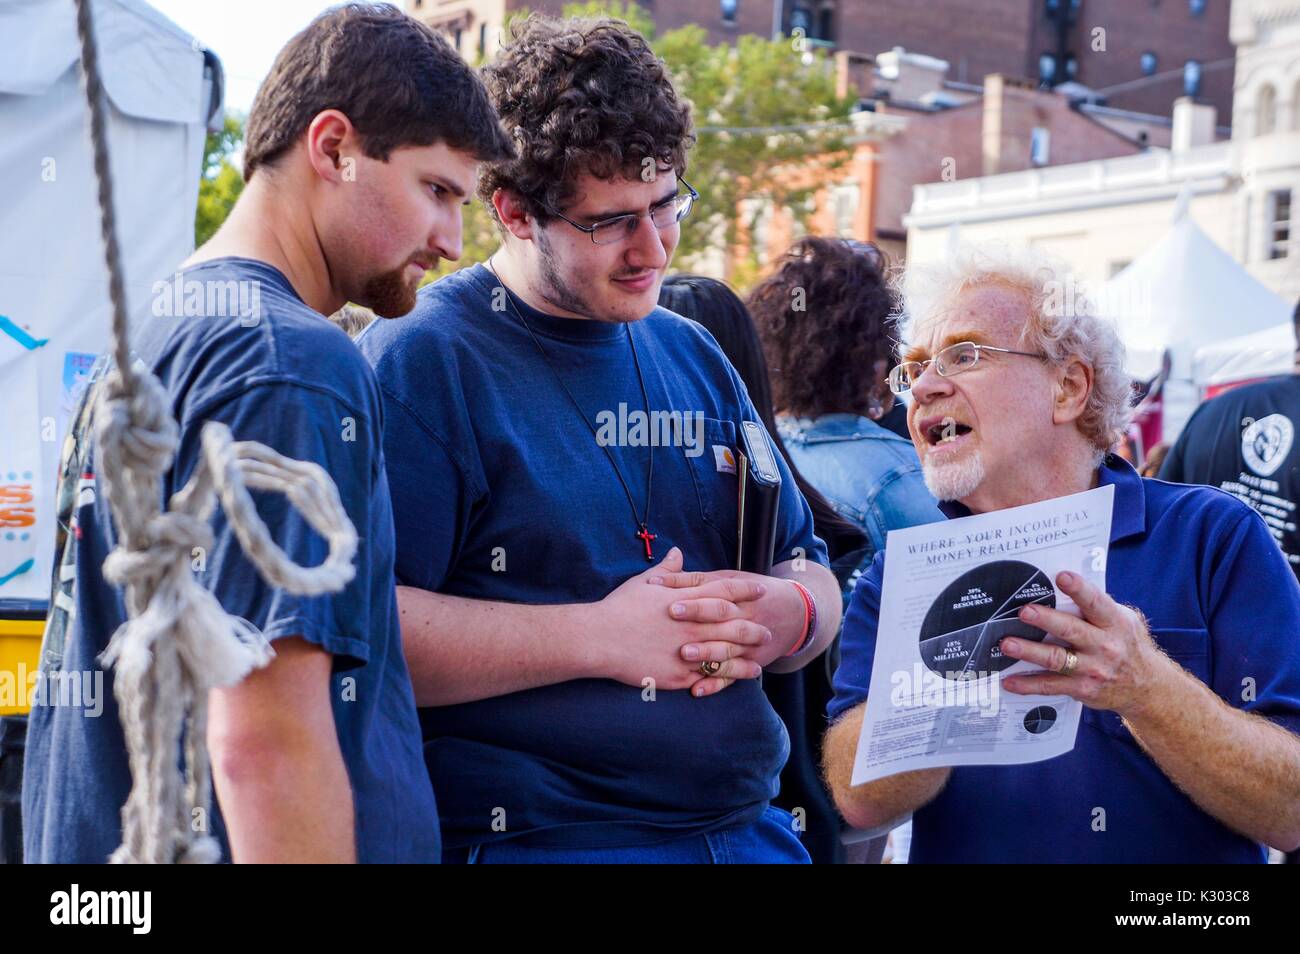 An older man with glasses reads from a flyer about income taxes to two young men wearing crosses and holding bibles, during Baltimore Book Festival, Baltimore, Maryland, September, 2013. Courtesy Eric Chen. Stock Photo